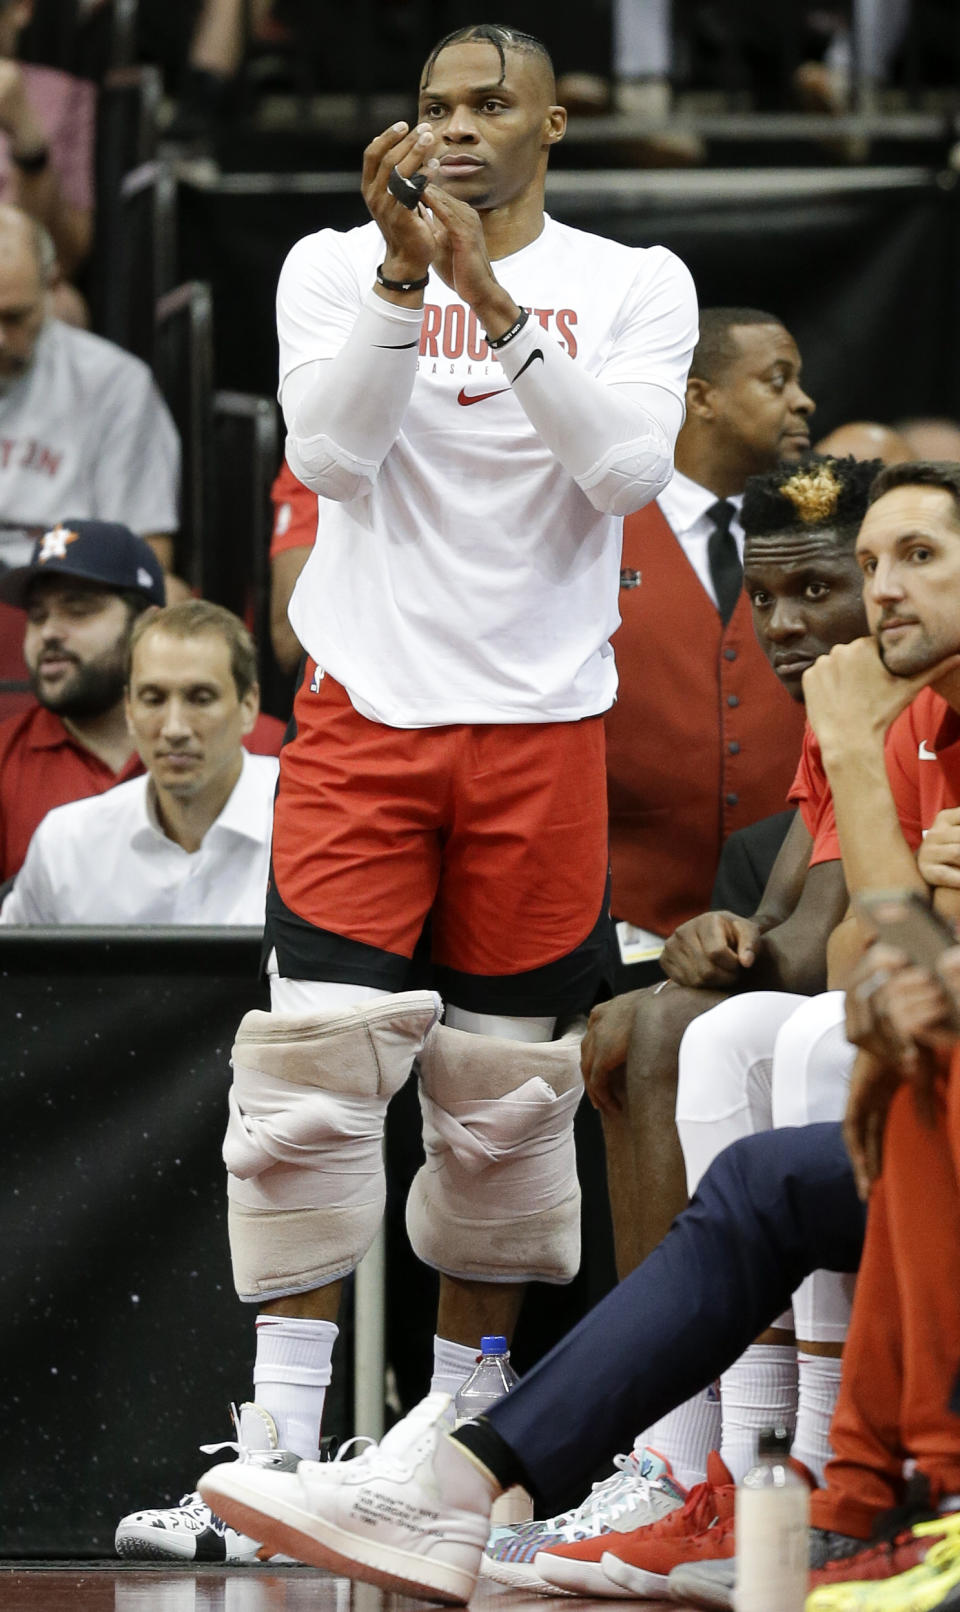 Houston Rockets guard Russell Westbrook watches from the bench area during the first half of the team's NBA basketball game against the Milwaukee Bucks, Thursday, Oct. 24, 2019, in Houston. (AP Photo/Eric Christian Smith)